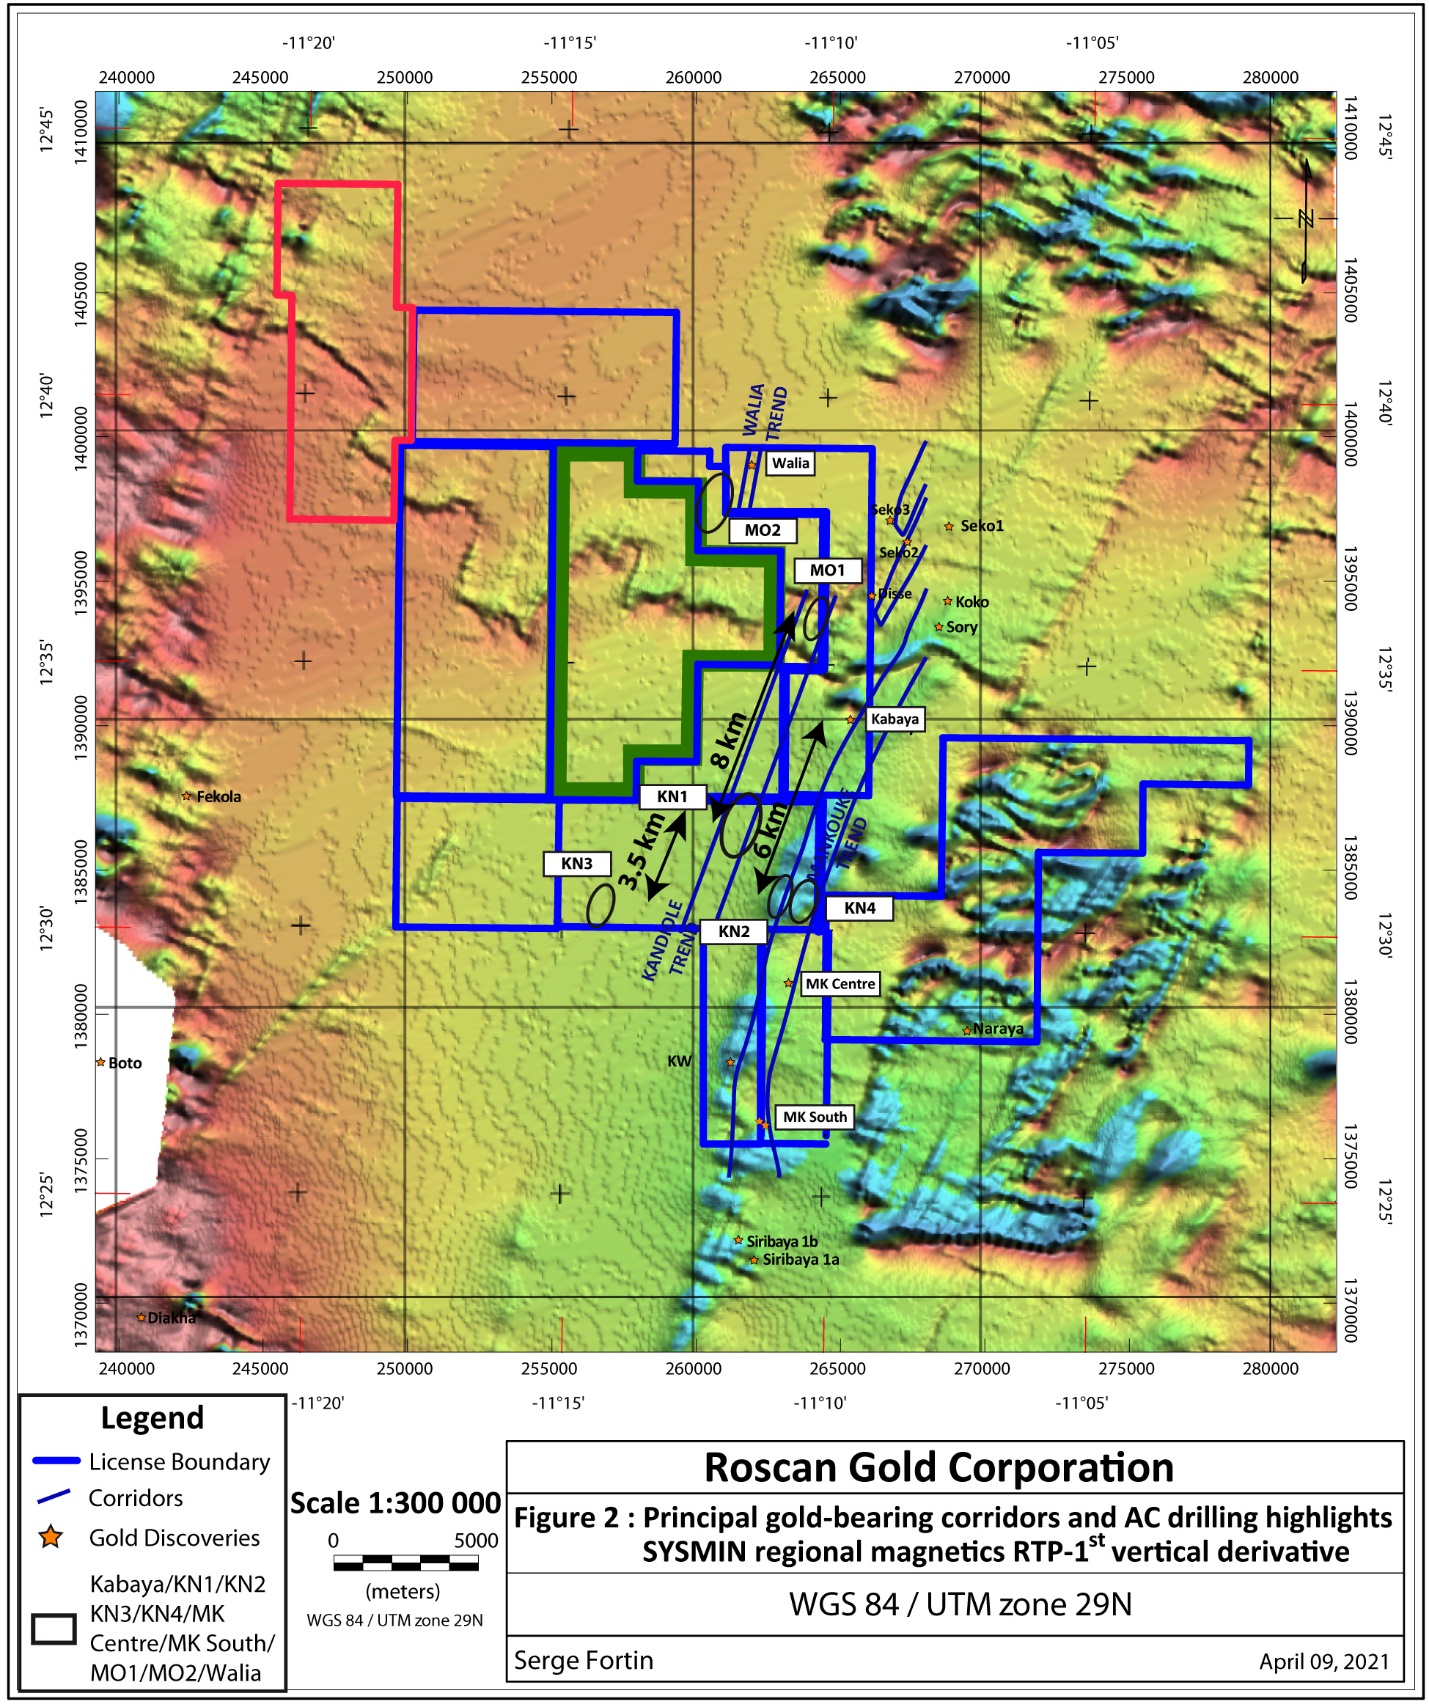 Roscan Gold Corporation, Monday, April 12, 2021, Press release picture